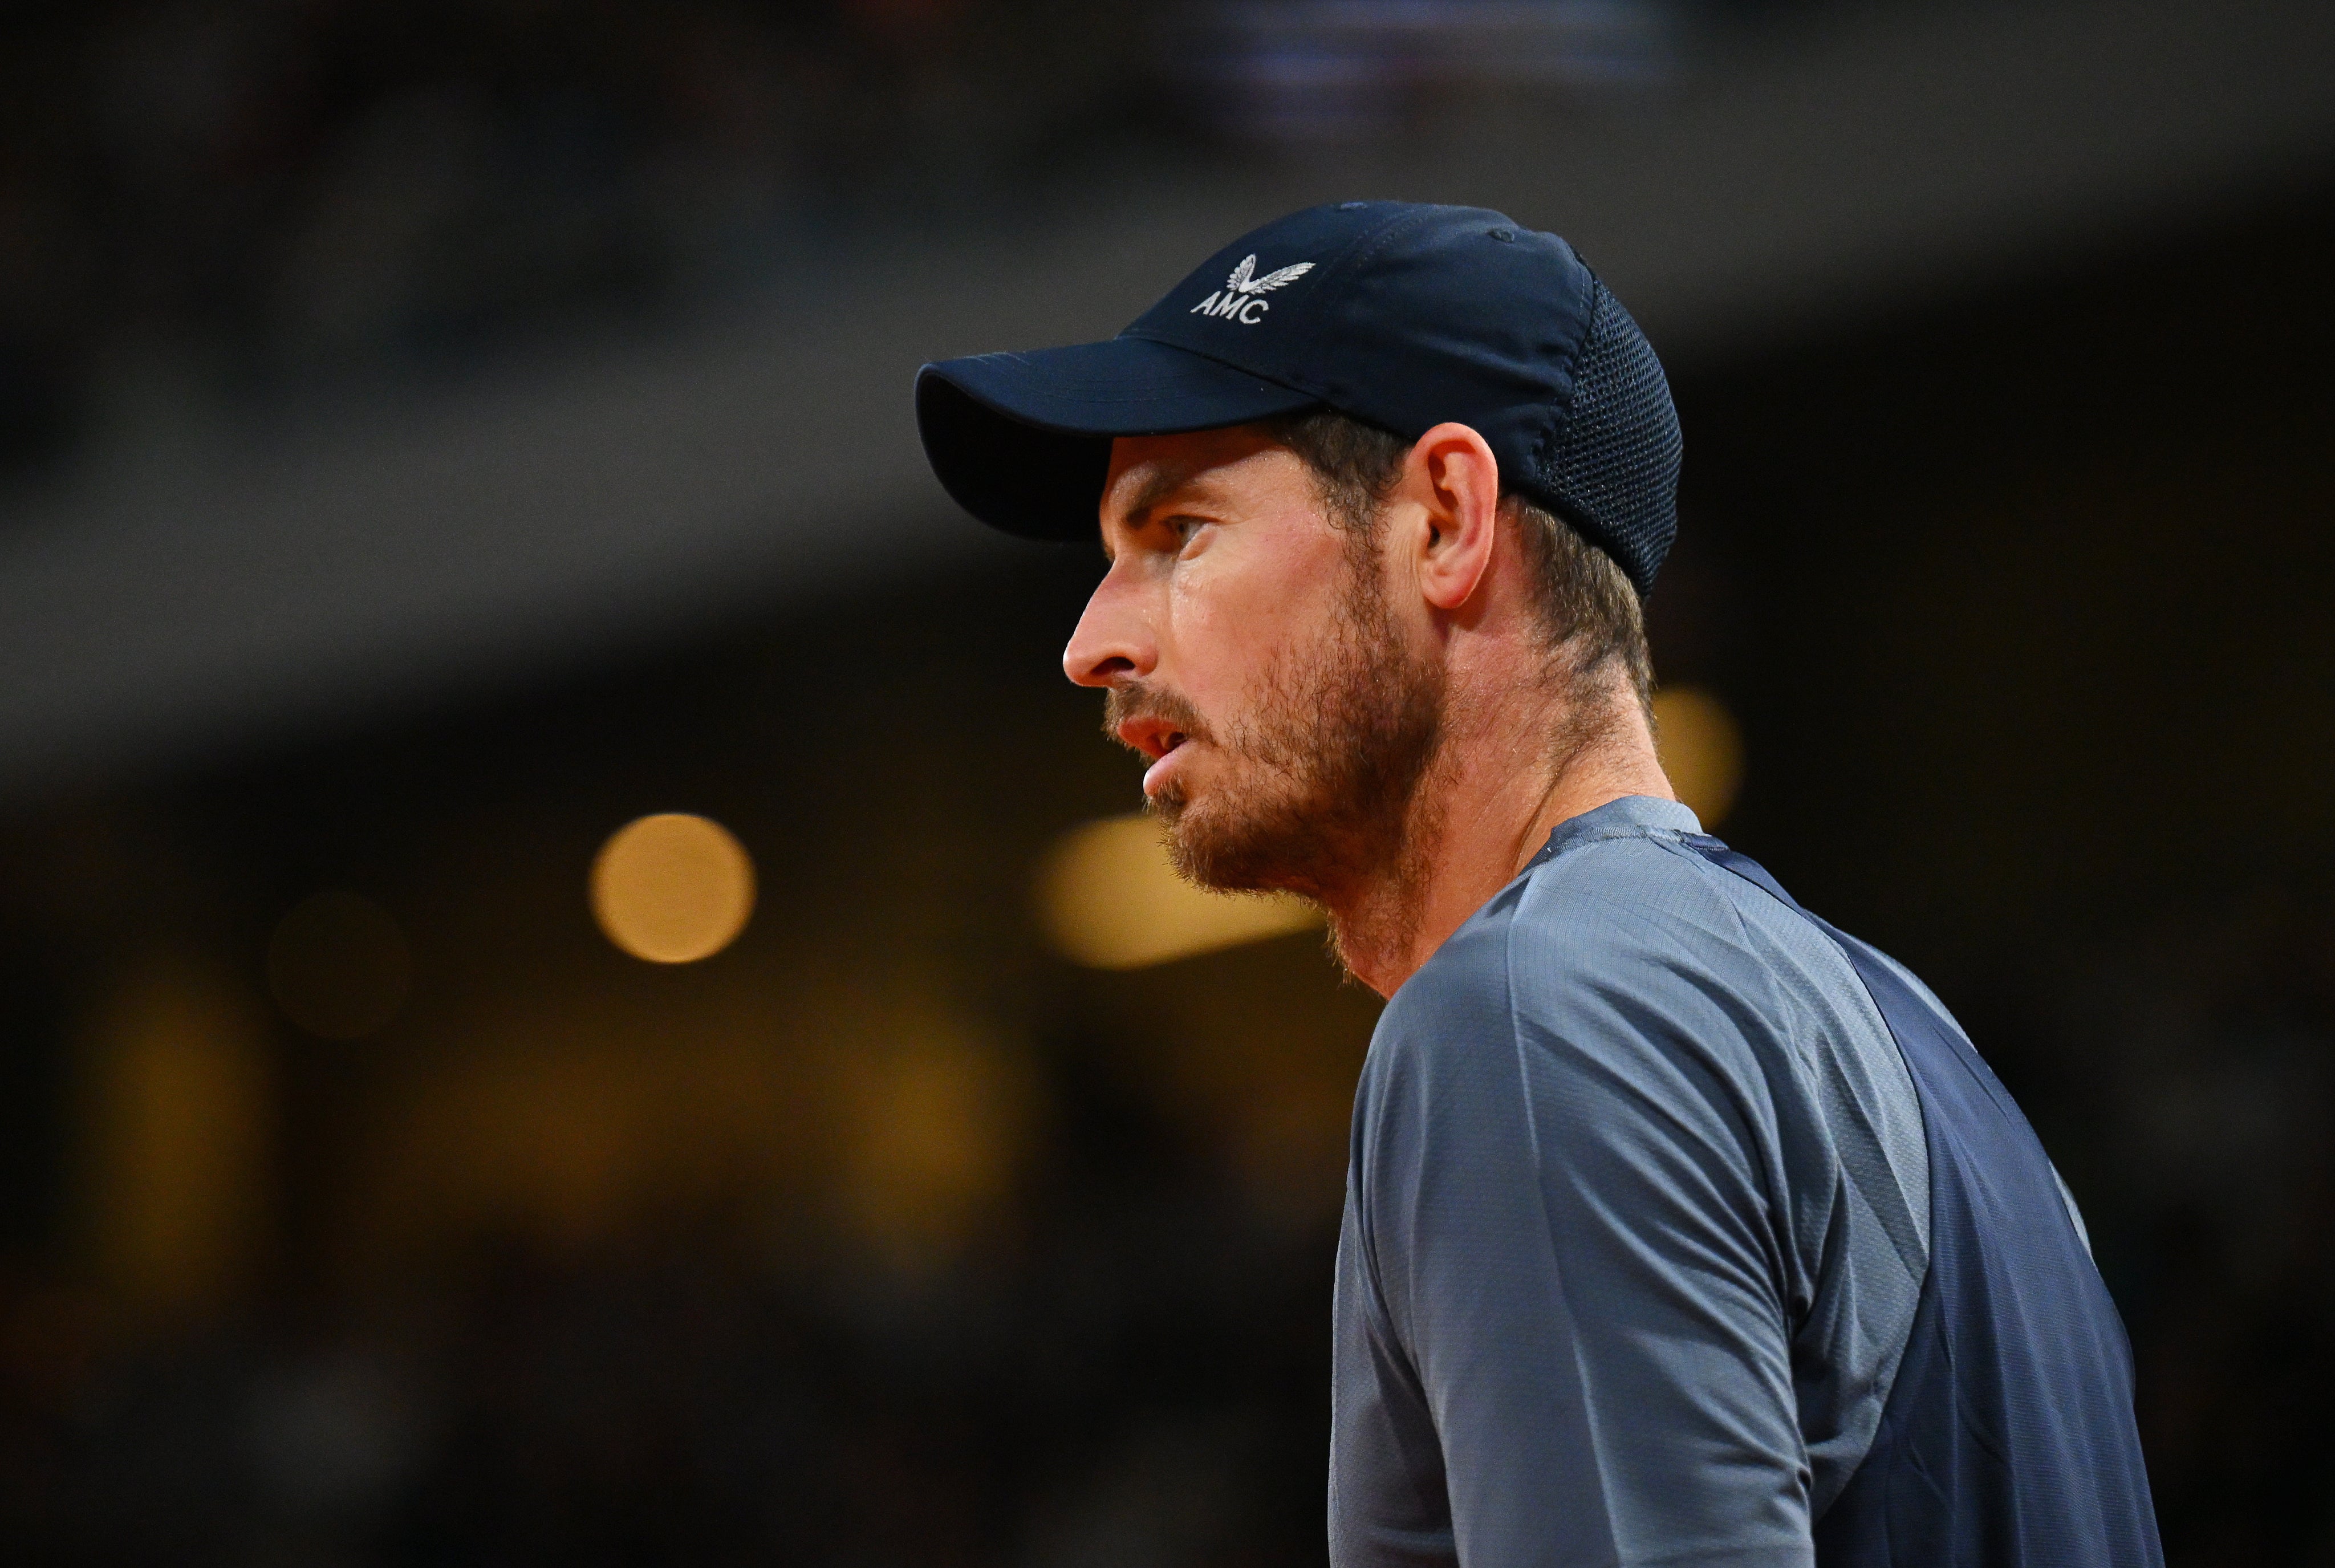 Andy Murray will switch focus to the grass court season after two first-round defeats at Roland Garros